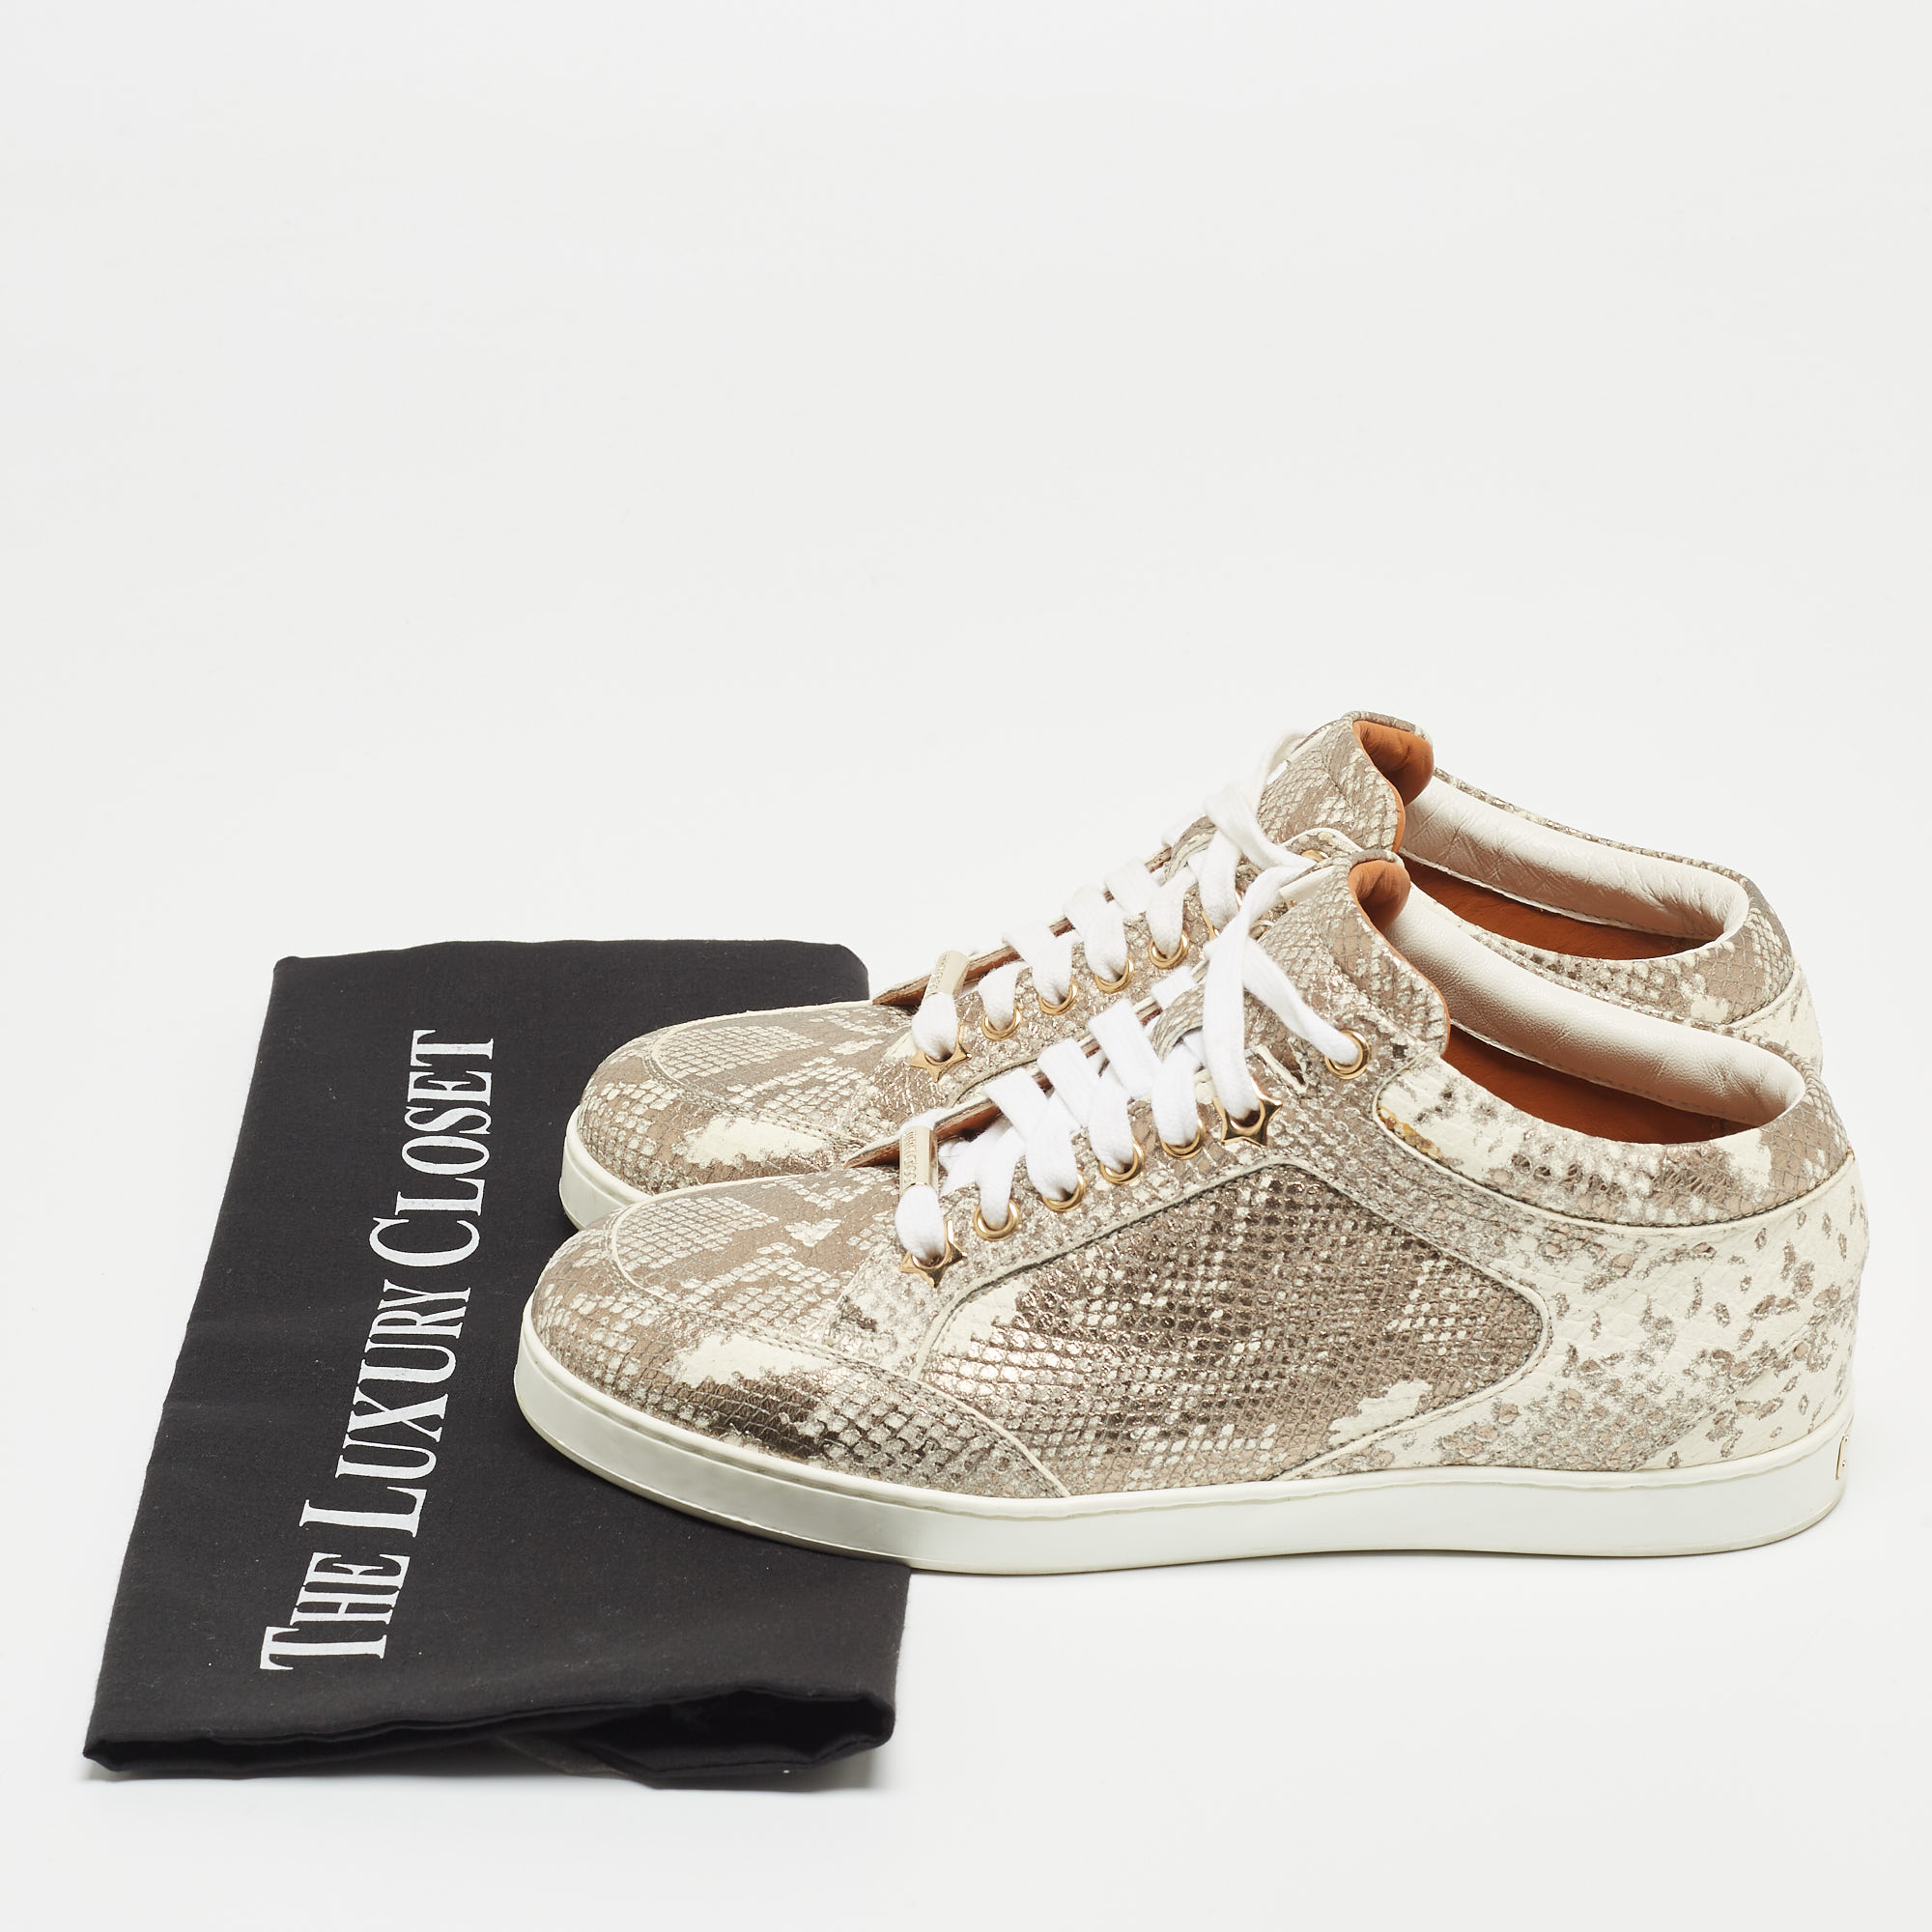 Jimmy Choo Metallic White Python Embossed Leather Low Top Sneakers Size 36